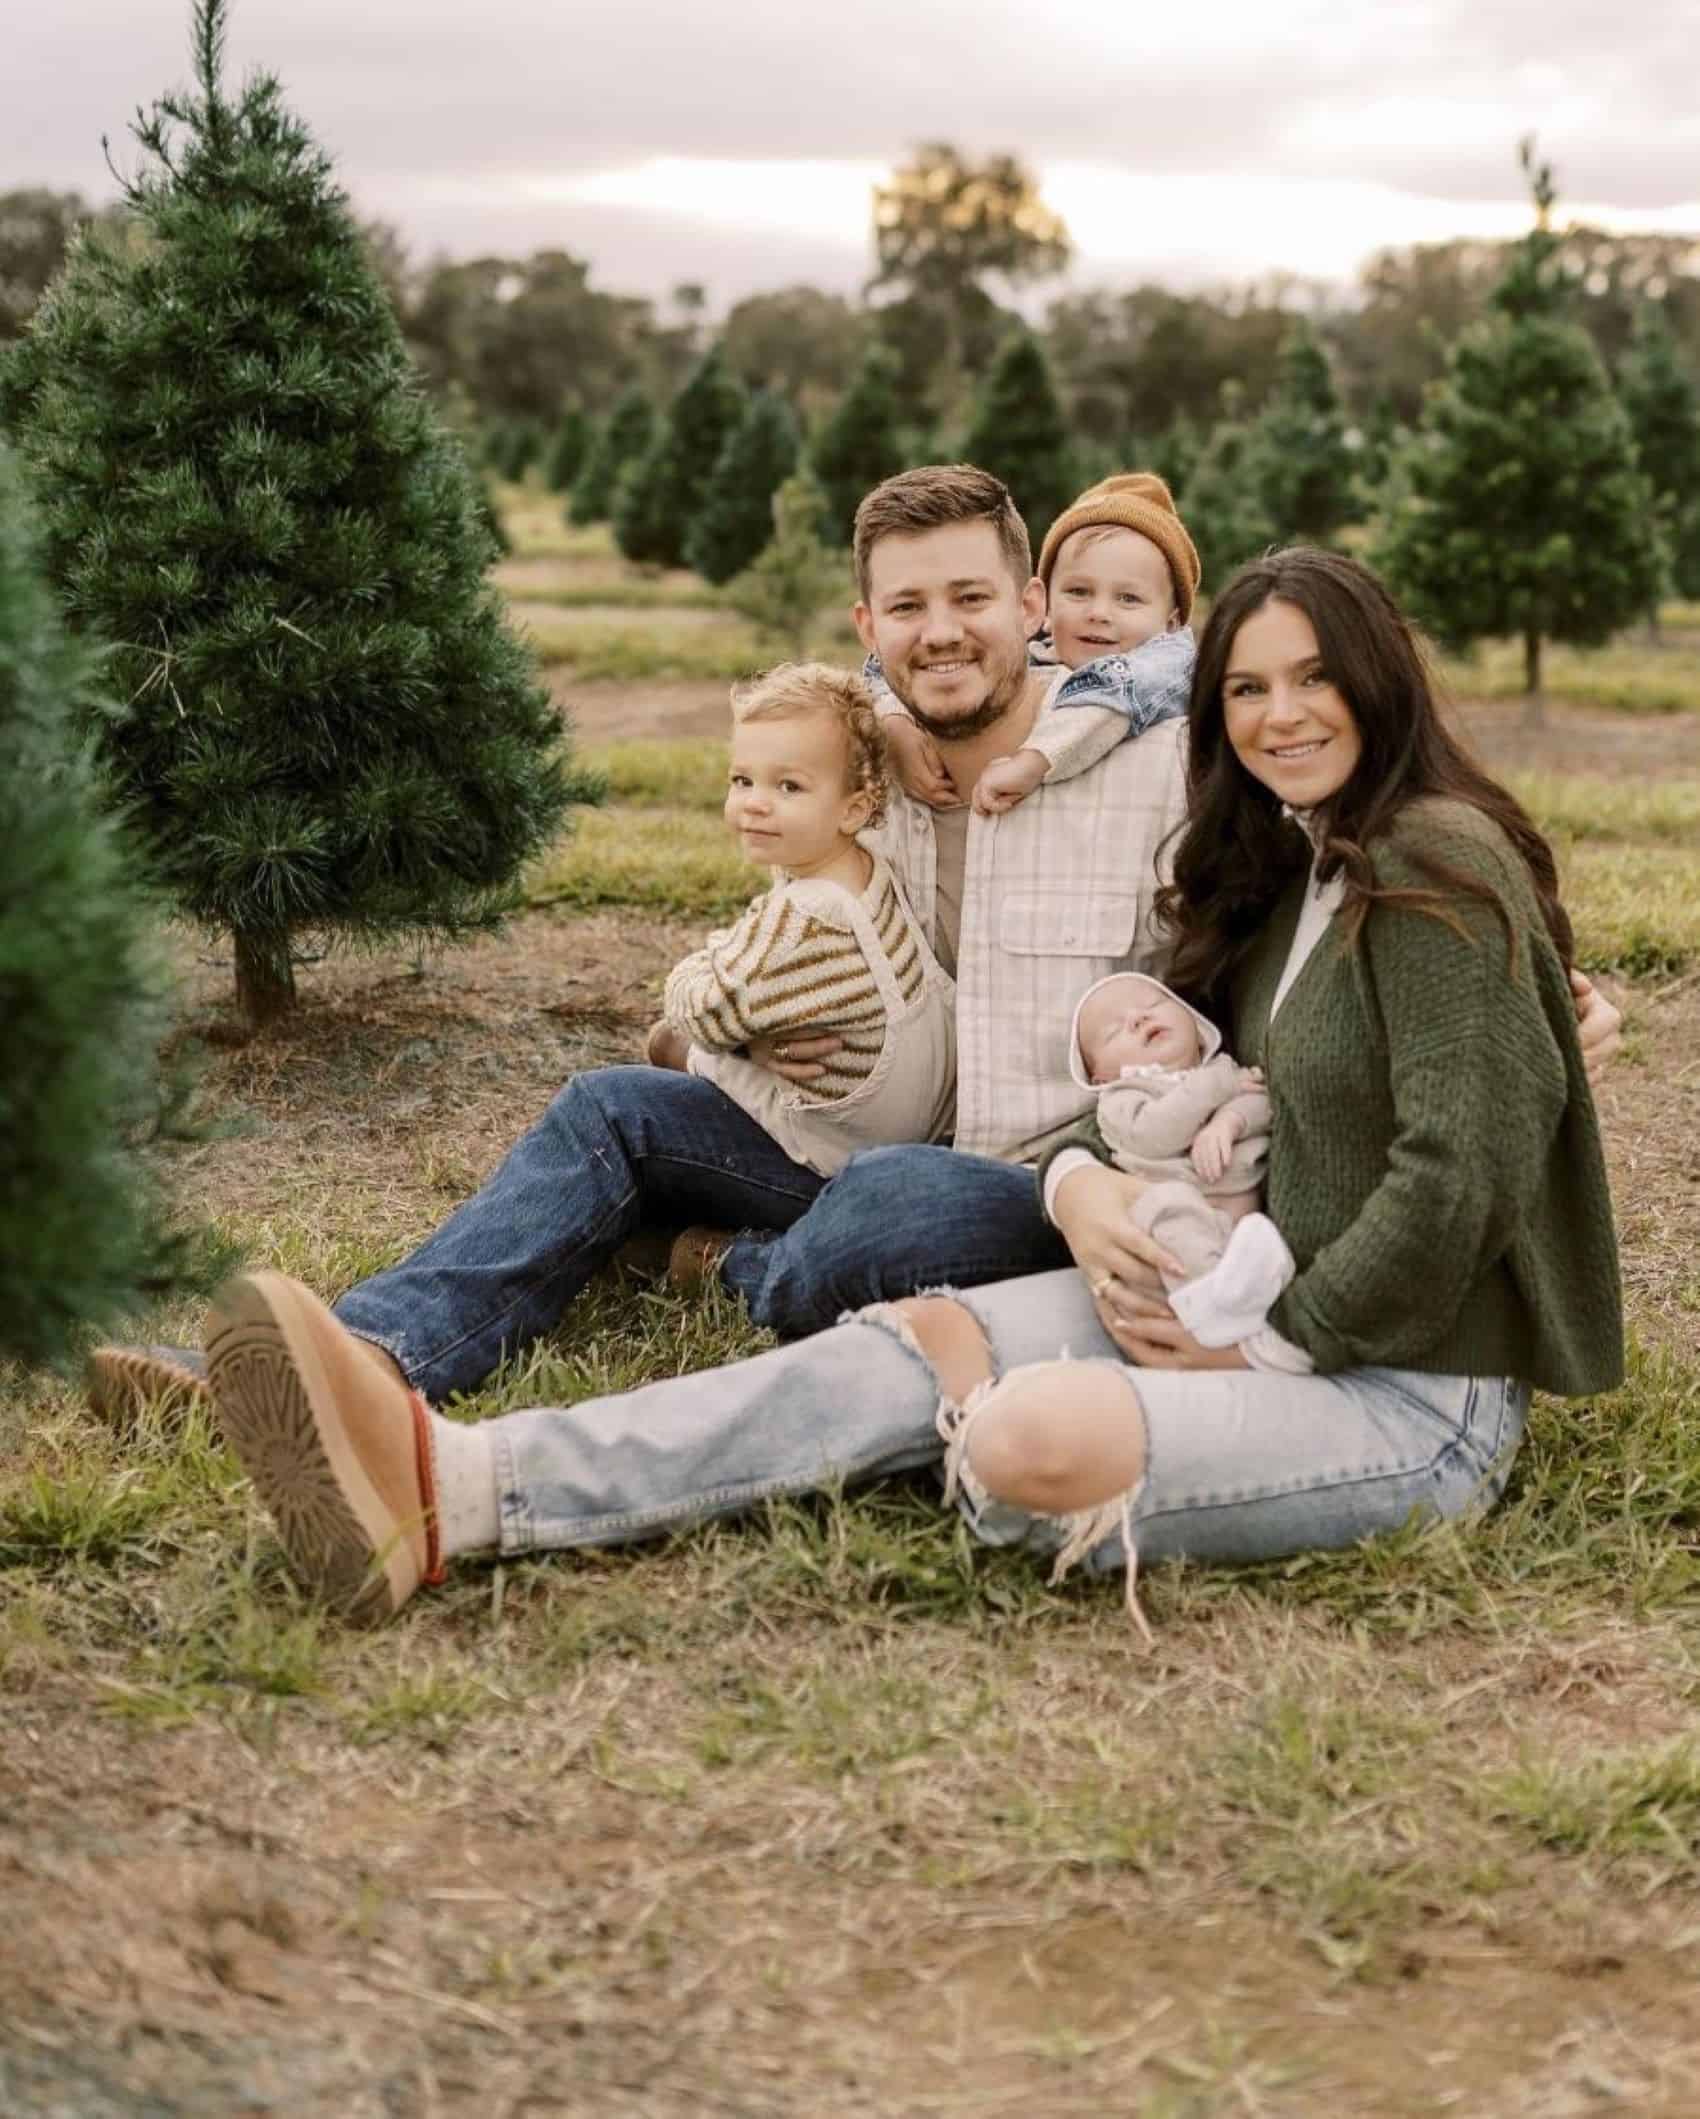 A winter family photo where the the family is dressed casually in jeans, sweaters, and flannels in green, beige, and white tones